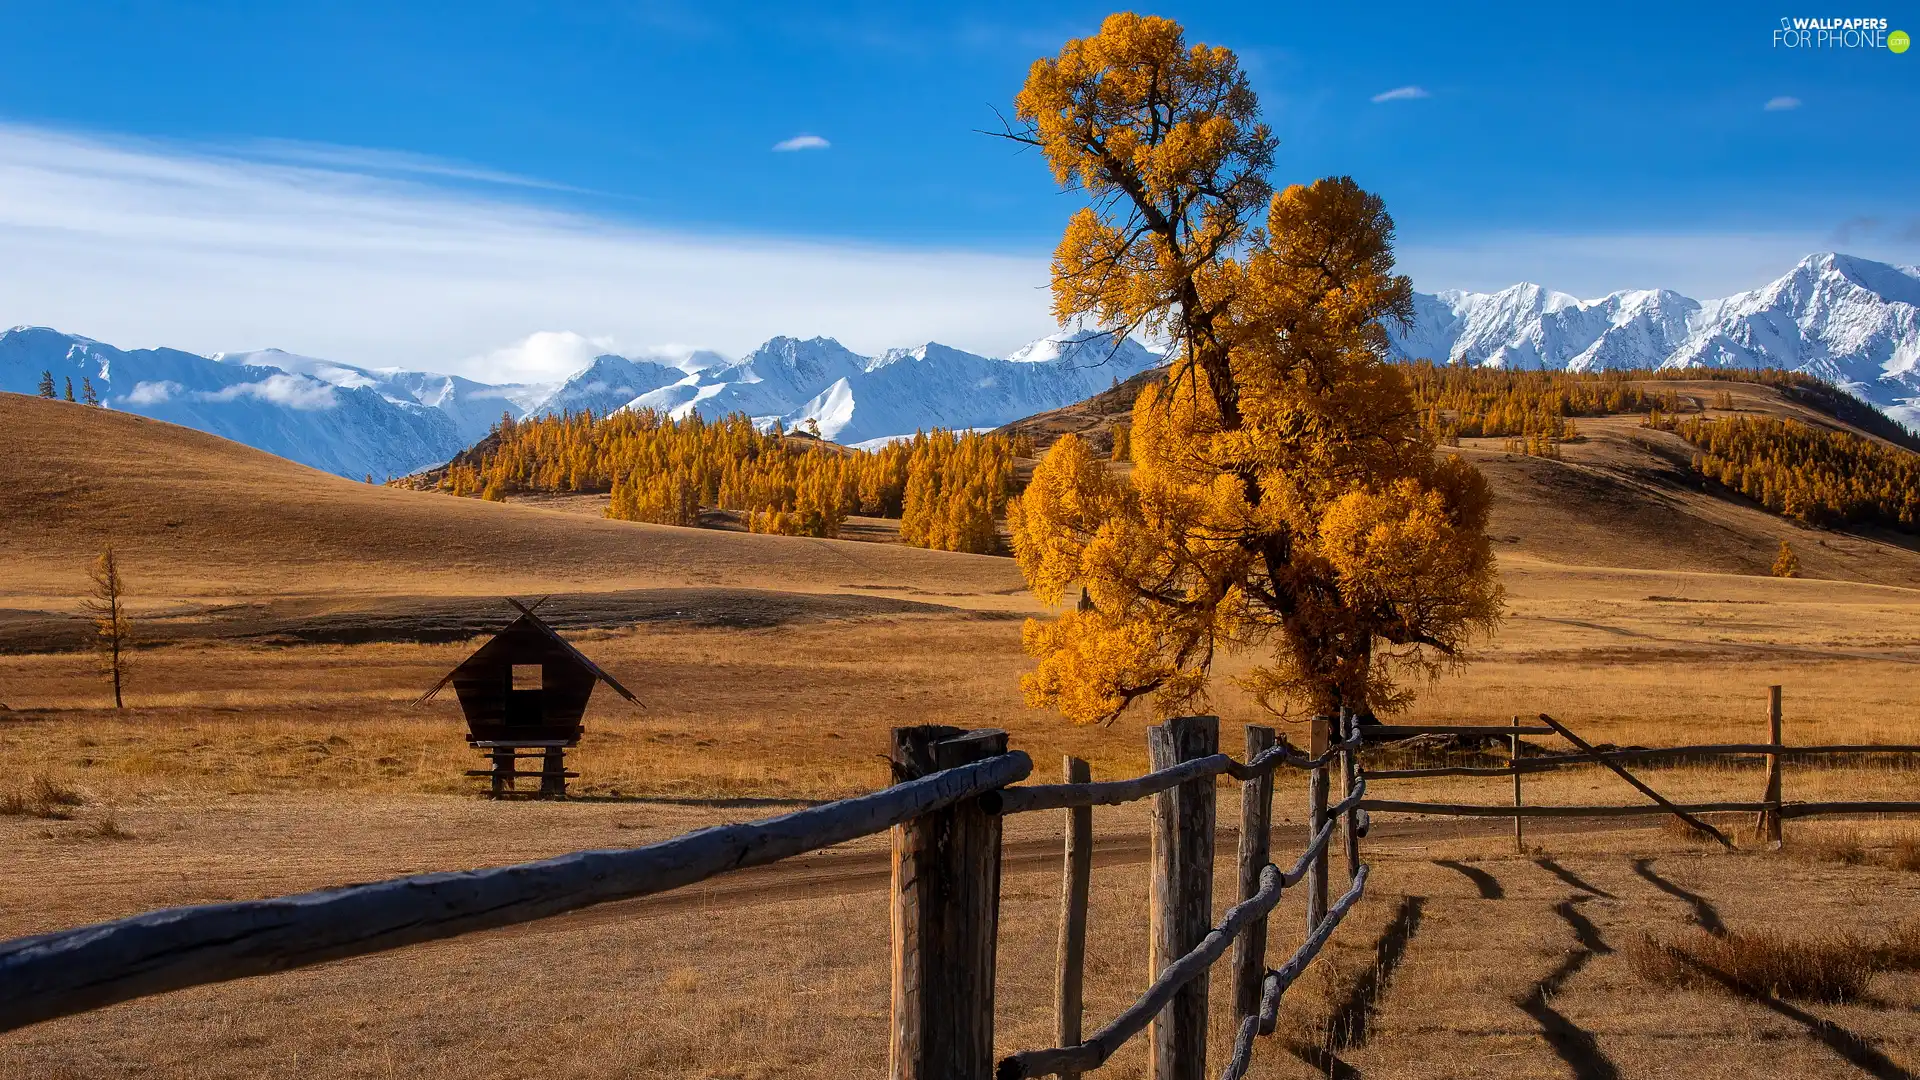 trees, Mountains, Fance, Hill, Snowy, fence, autumn